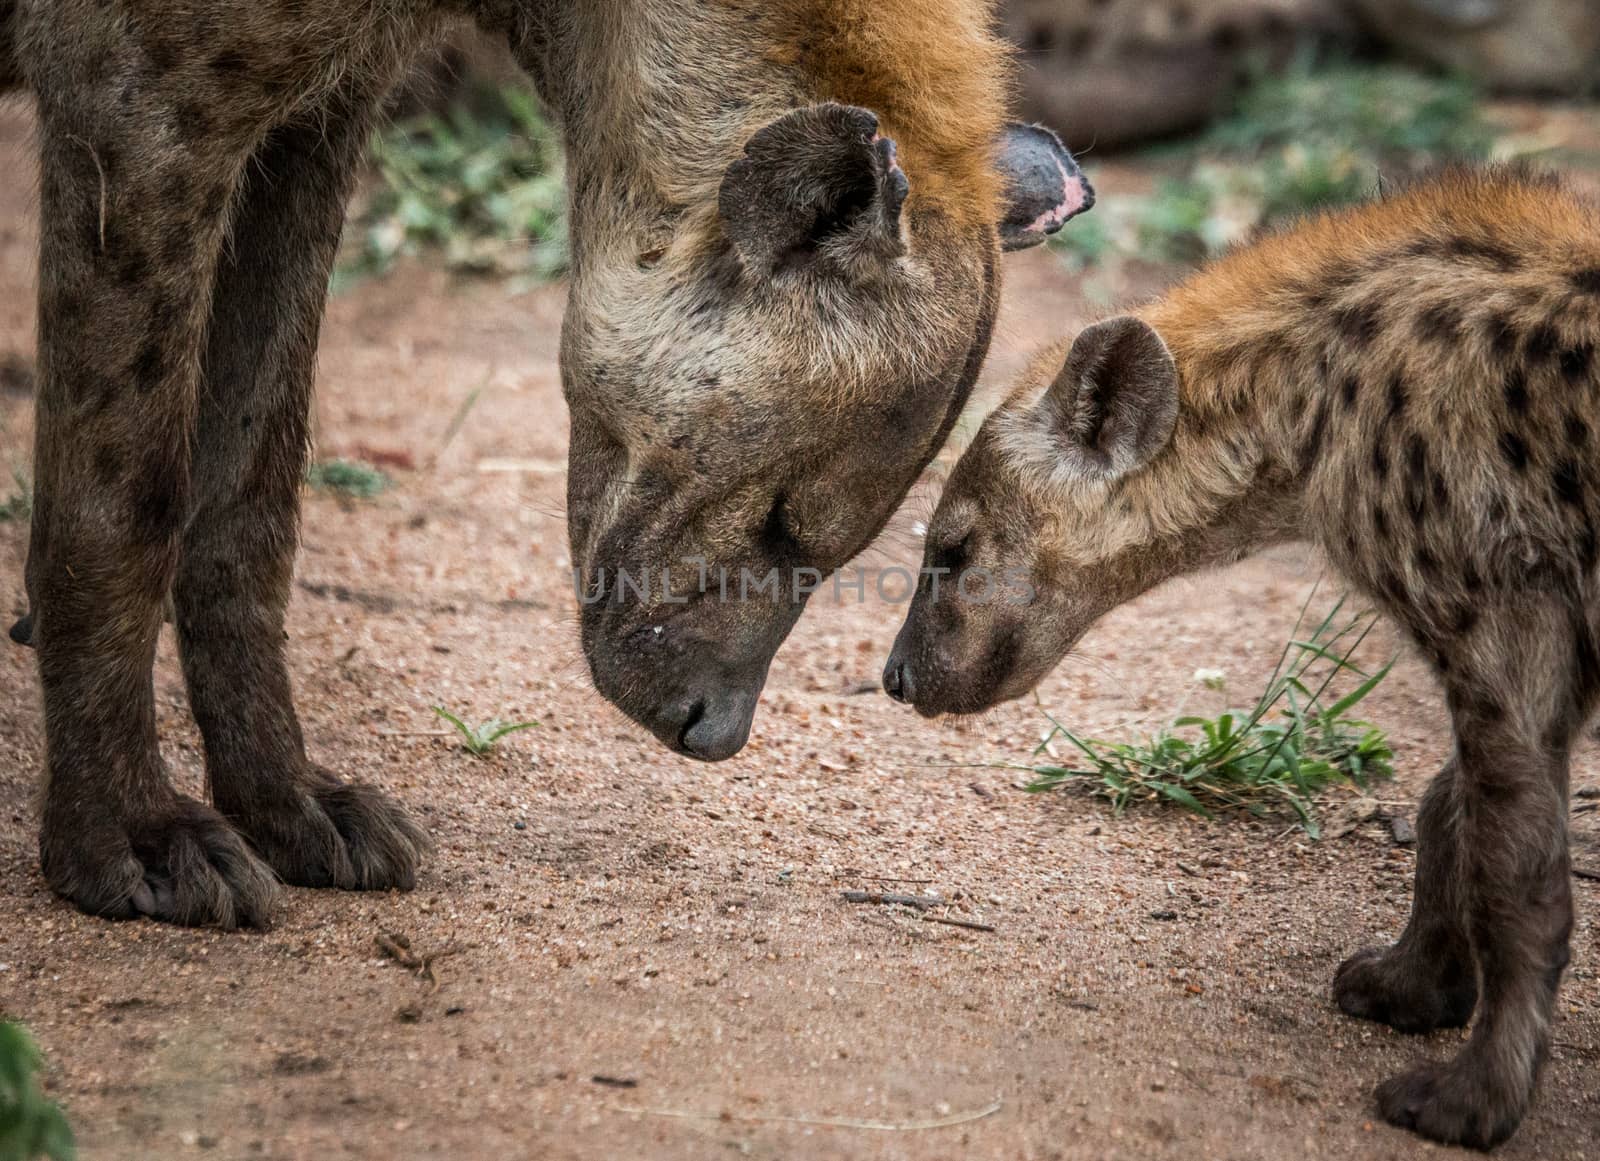 Spotted hyenas in the Kruger National Park, South Africa. by Simoneemanphotography